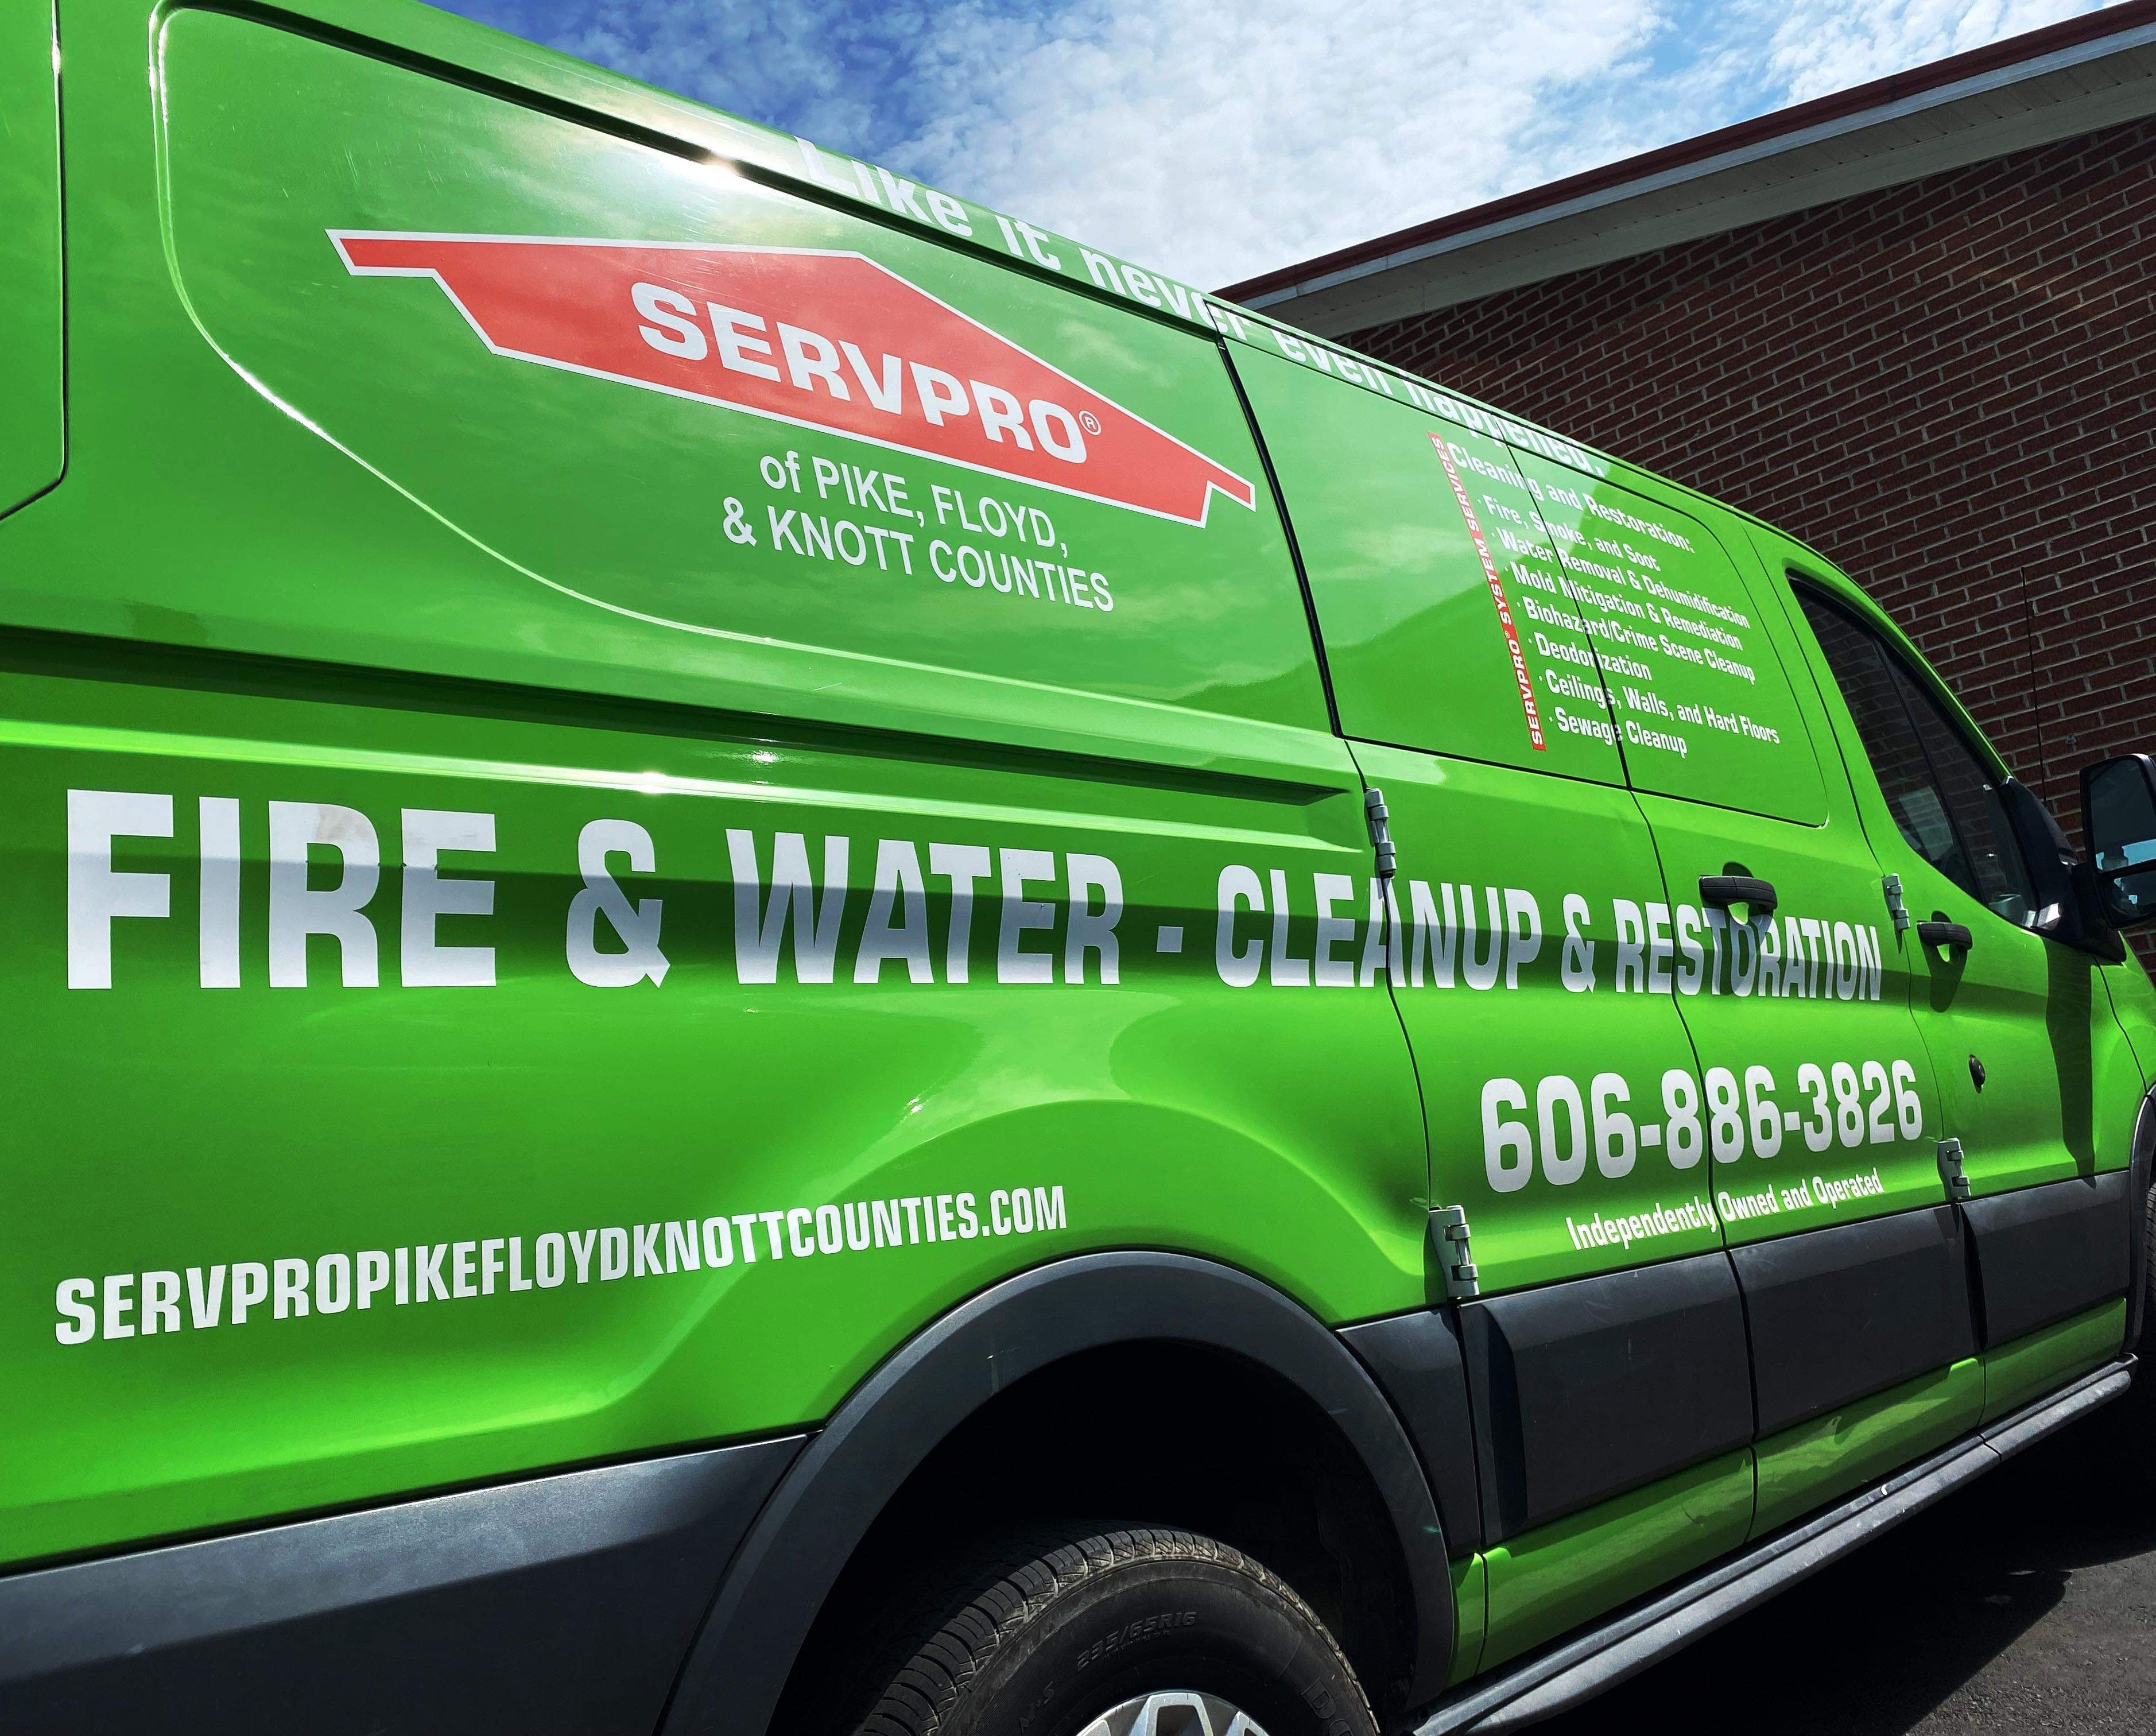 Image 2 | SERVPRO of Pike, Floyd & Knott Counties